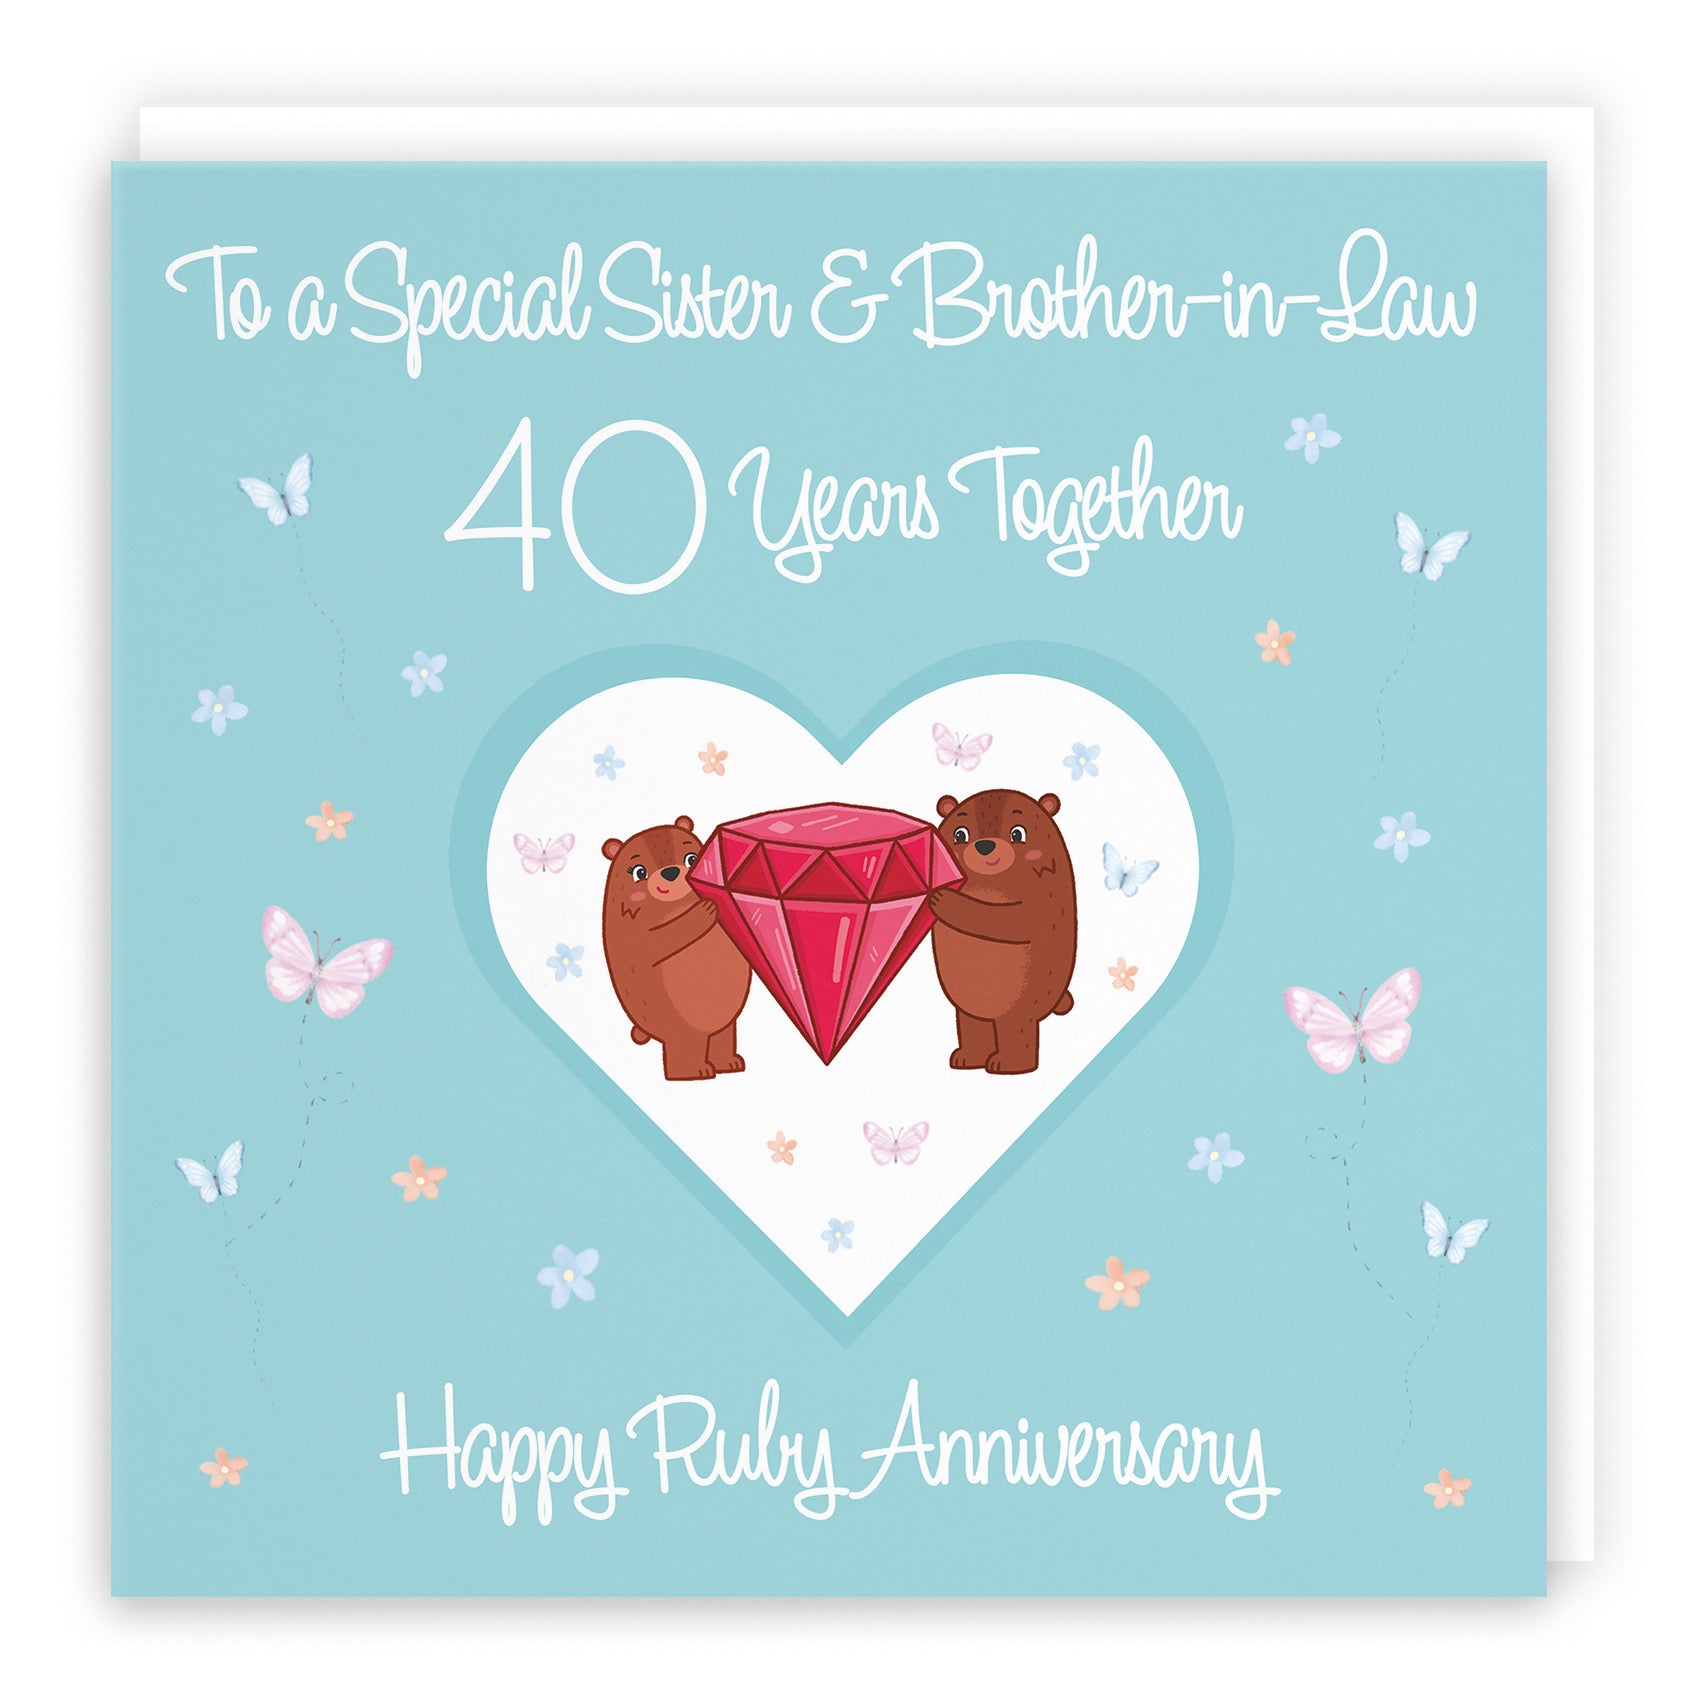 Large Sister & Brother-in-Law 40th Anniversary Card Romantic Meadows - Default Title (B0CXY7B1L5)